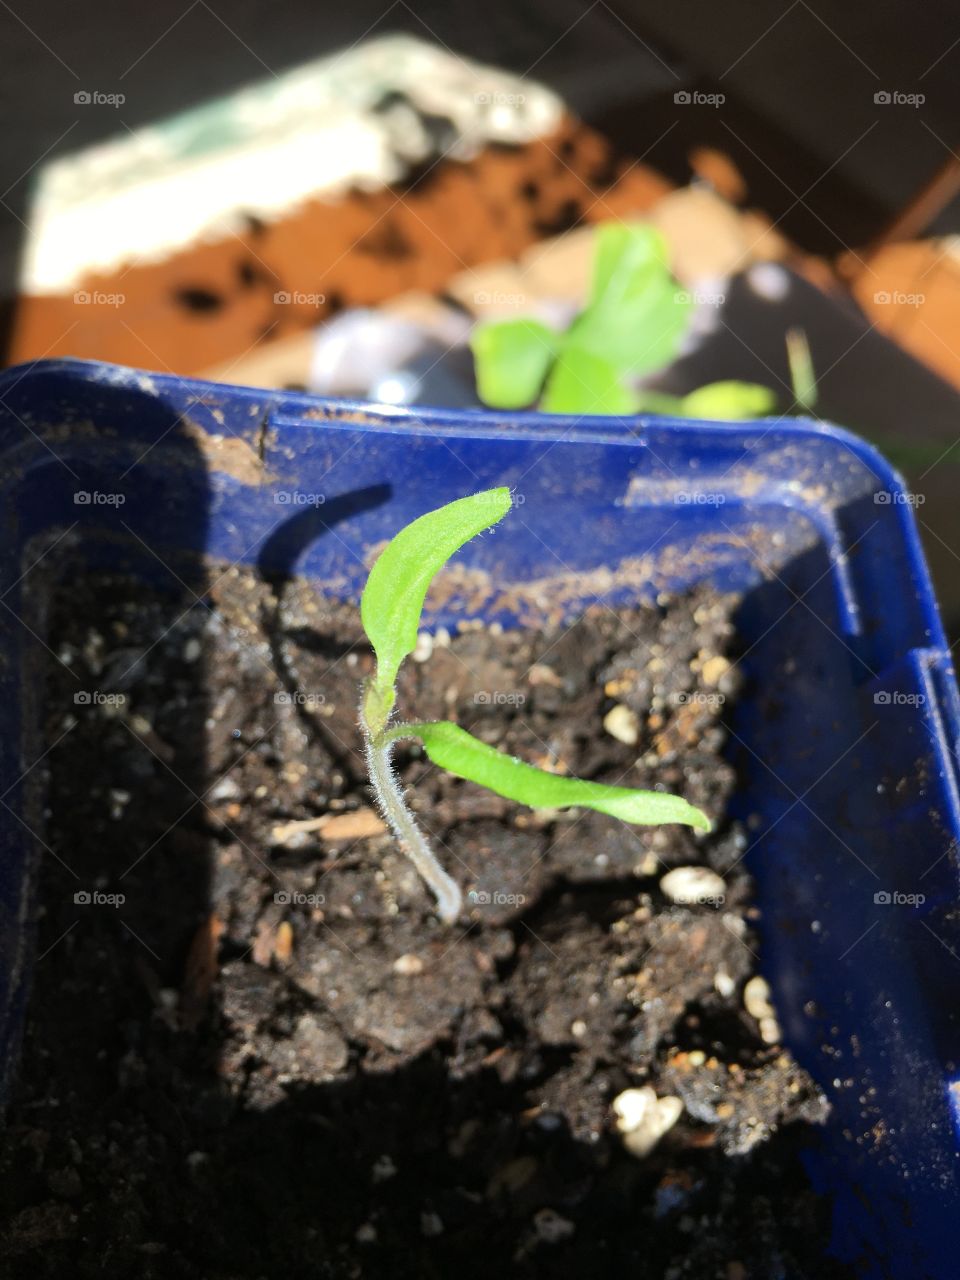 A plant seedling growing from a small plastic pot